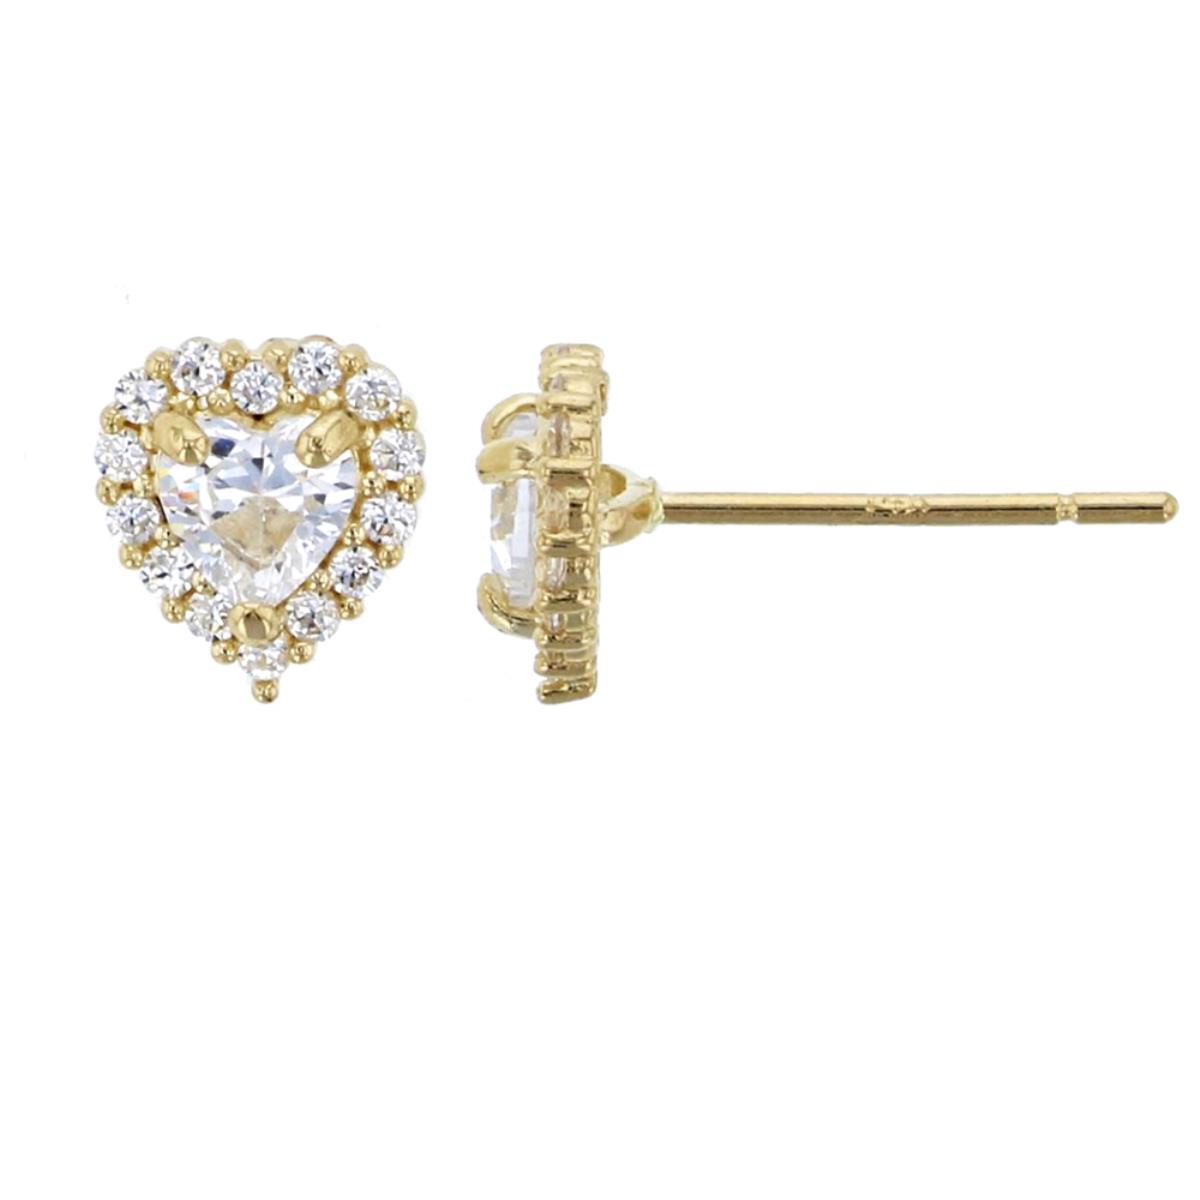 10K Yellow Gold Micropave 3.5mm Heart Cut Halo Stud Earring